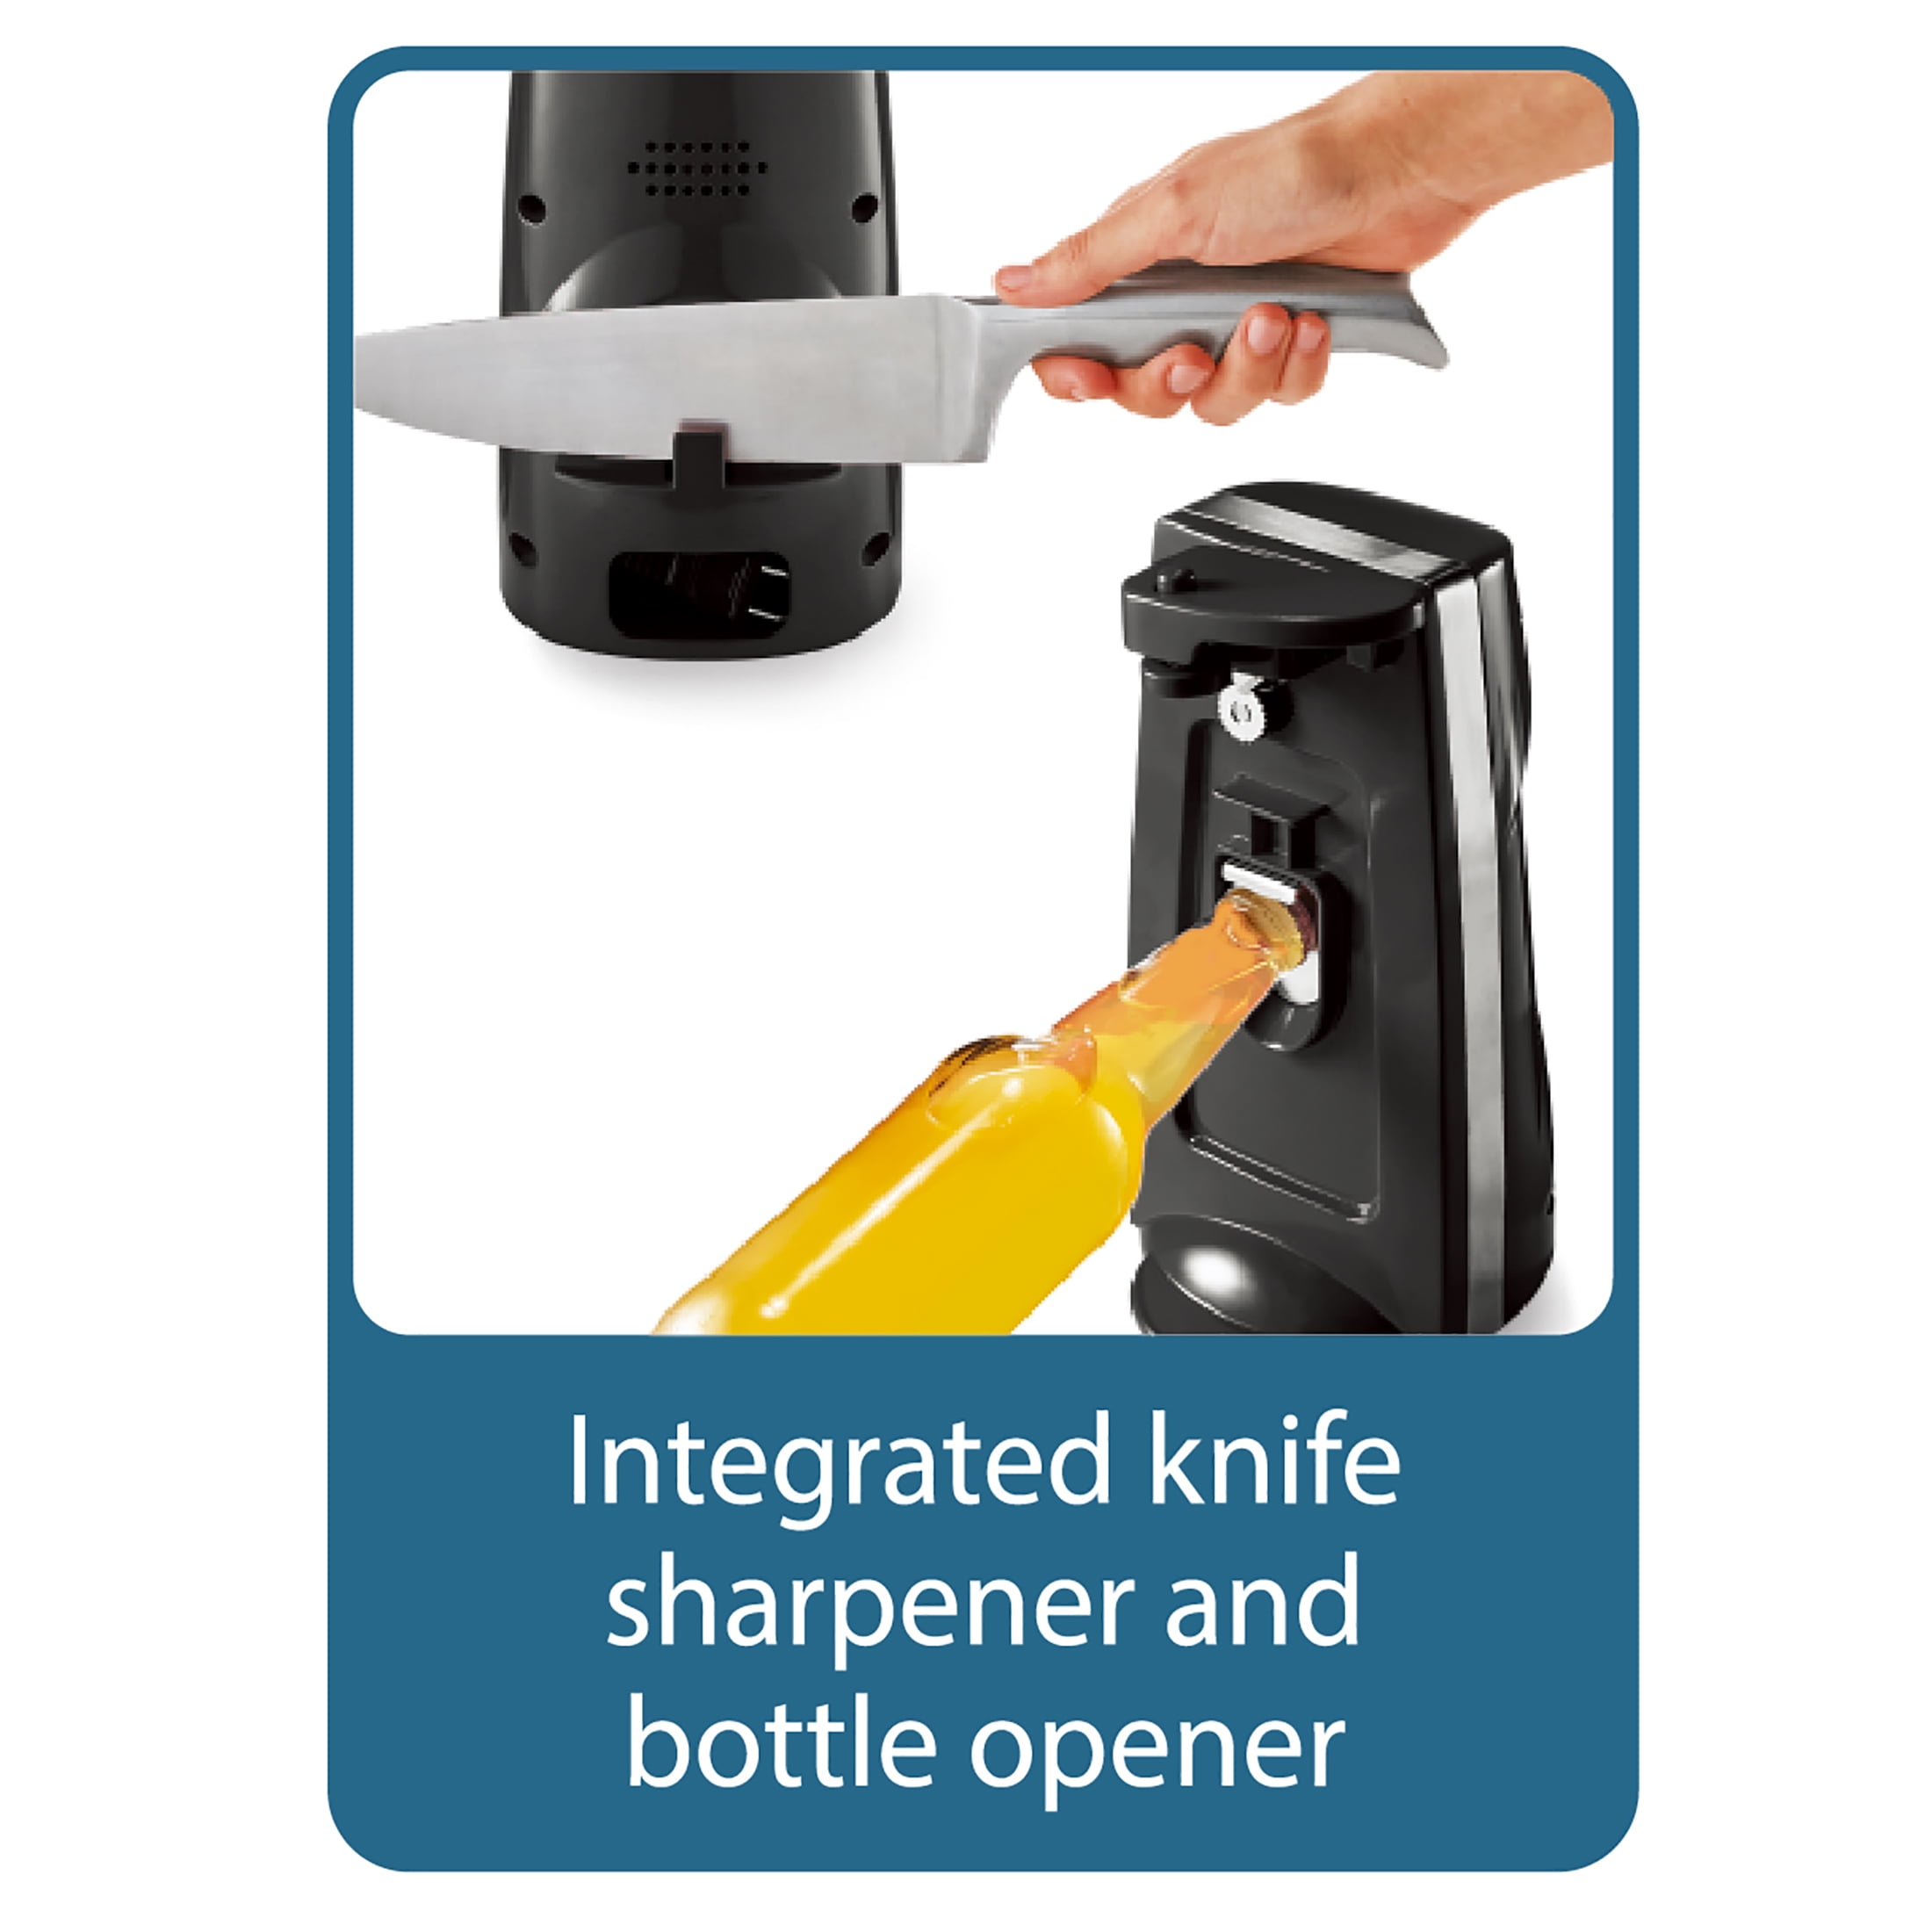 This Hands-Free Electric Can Opener Has Over 28,800 Fans on